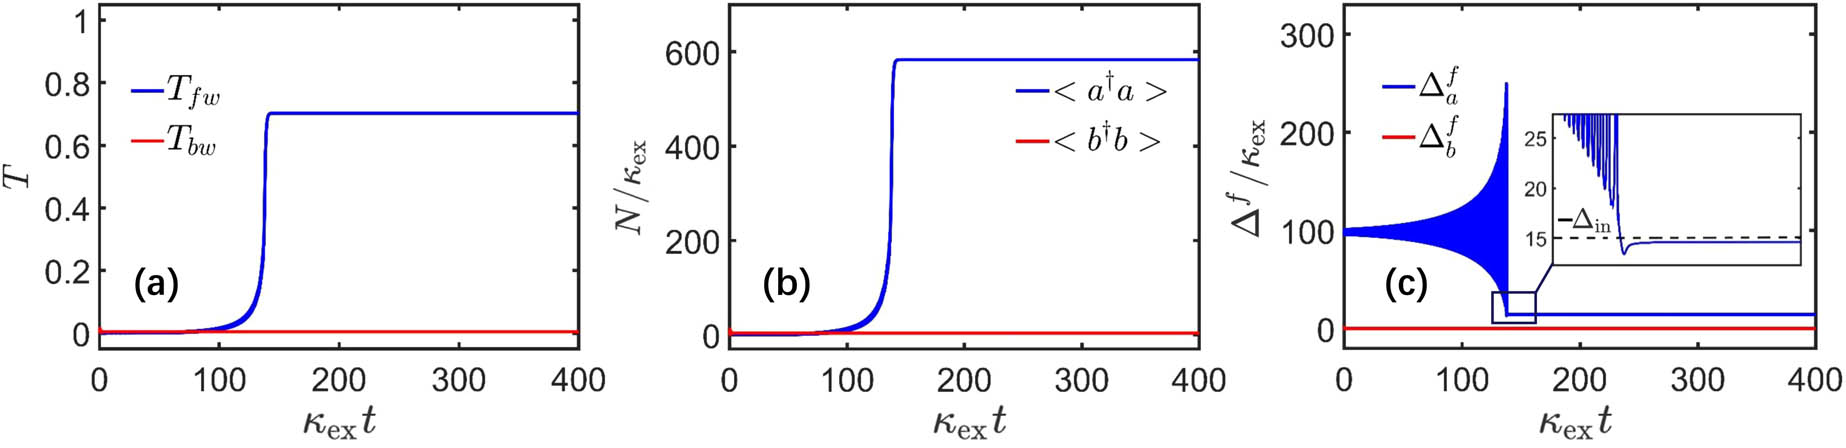 Nonreciprocal transmission properties. (a) Nonreciprocal transmission. Blue (red) curve is for the forward (backward) transmission Tfw (Tbw). (b) Average photon number inside the cavity. Blue (red) curve is for the forward (backward) case. (c) Feedback-induced resonance frequency shifts. Blue (red) curve is for the frequency shift in forward (backward) case. In the inset, the black dashed curve indicates the input detuning of −Δin=15κex. For the steady state, the feedback-induced frequency shift for the forward (backward) case is Δa,ssf≈14.6κex (Δb,ssf≈0.5κex). All calculations are obtained by solving Eqs. (7) and (14) numerically with parameters: γ=0.01, κi=0.2κex, ωc=190κex, A=12, Δin=−15κex, and Pin/ℏωin=830κex.